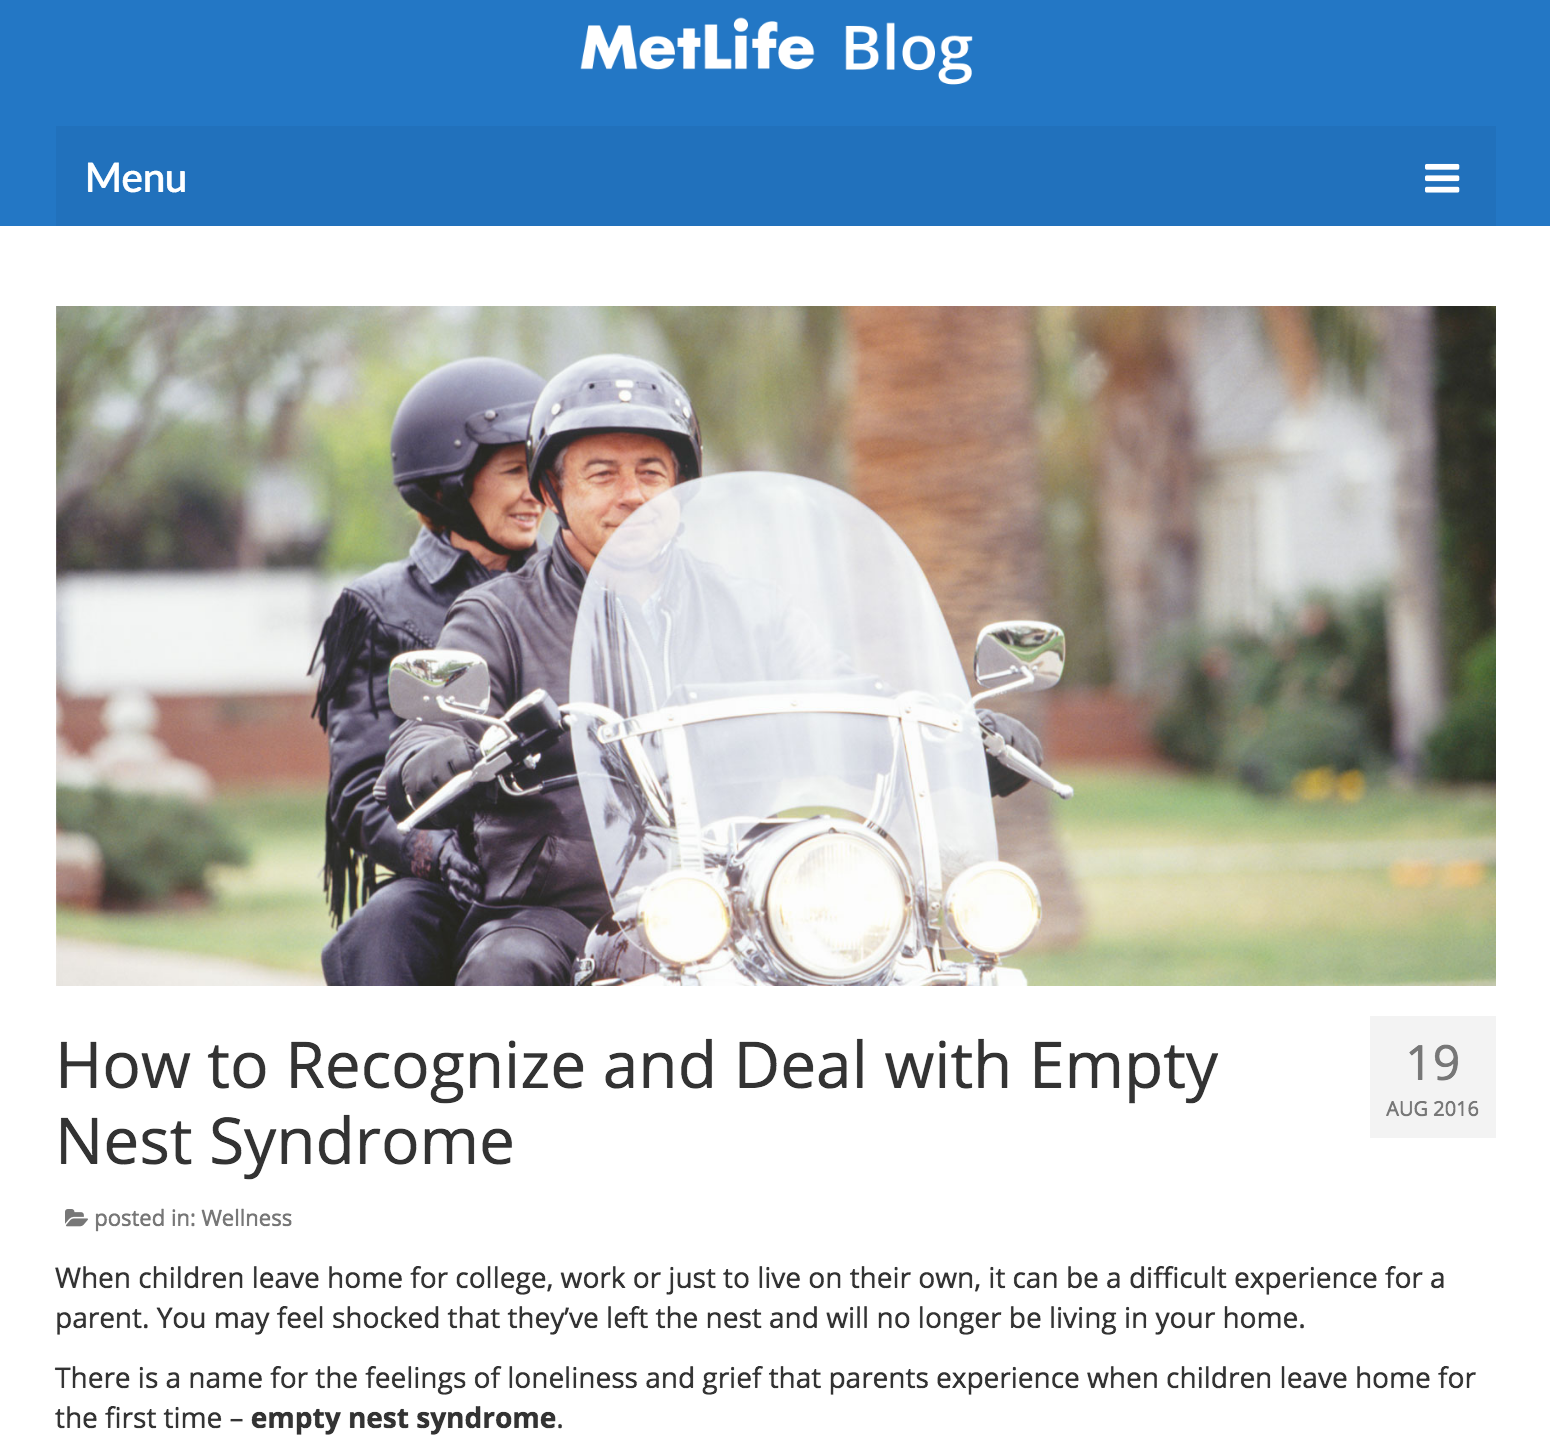 How to Recognize and Deal with Empty Nest Syndrome